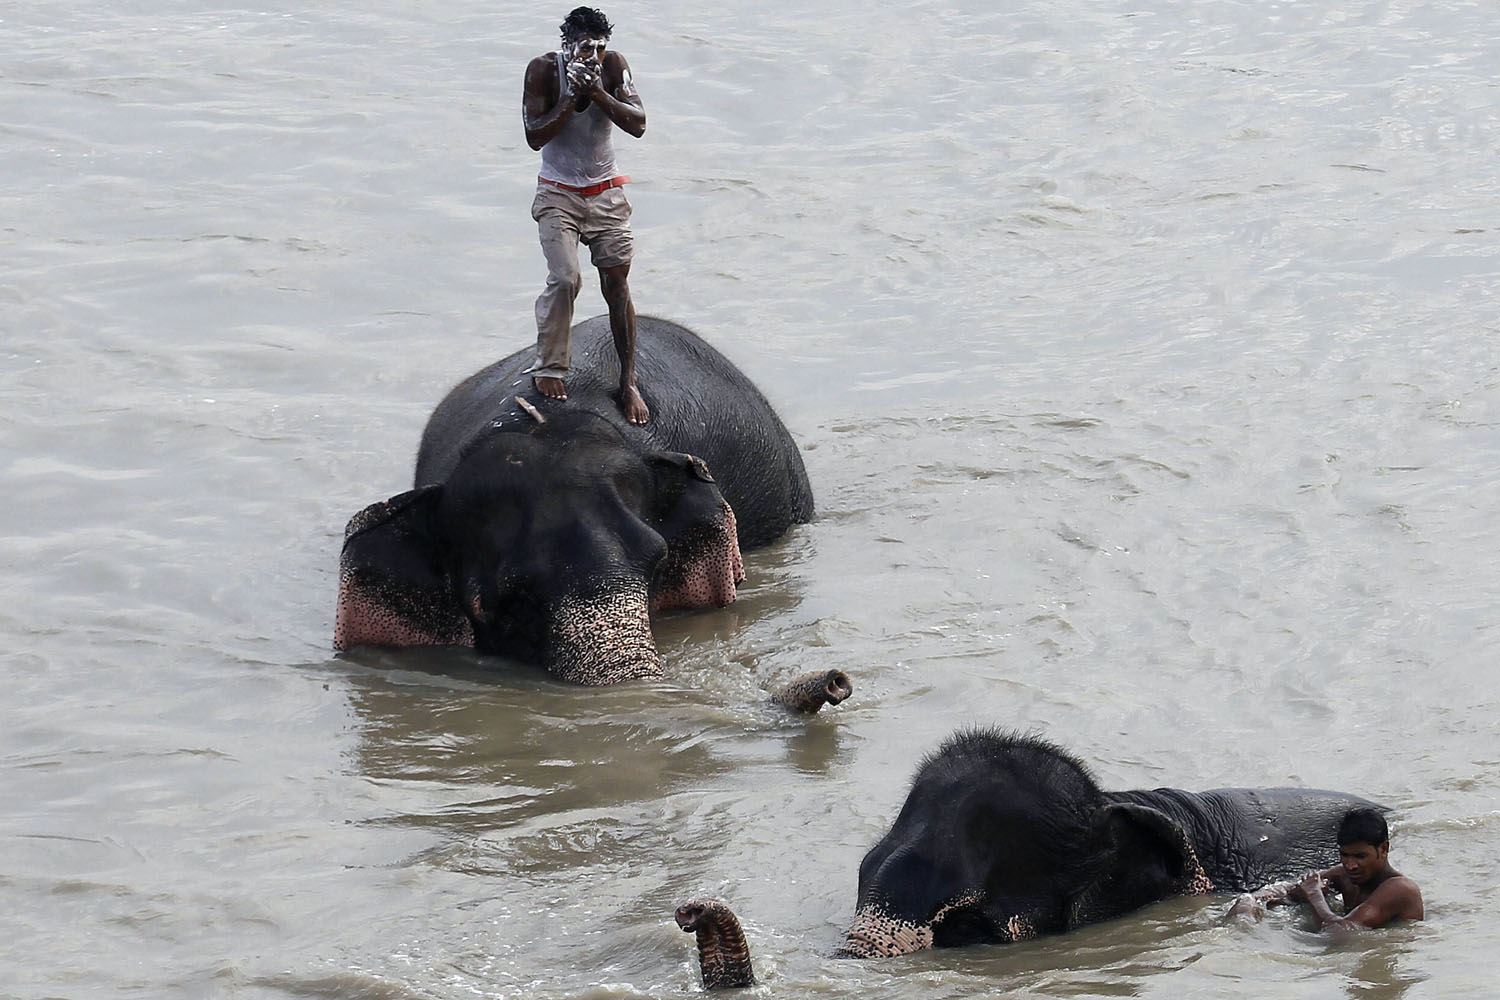 A mahout bathes as he stands atop his elephant in the waters of the Yamuna river in New Delhi